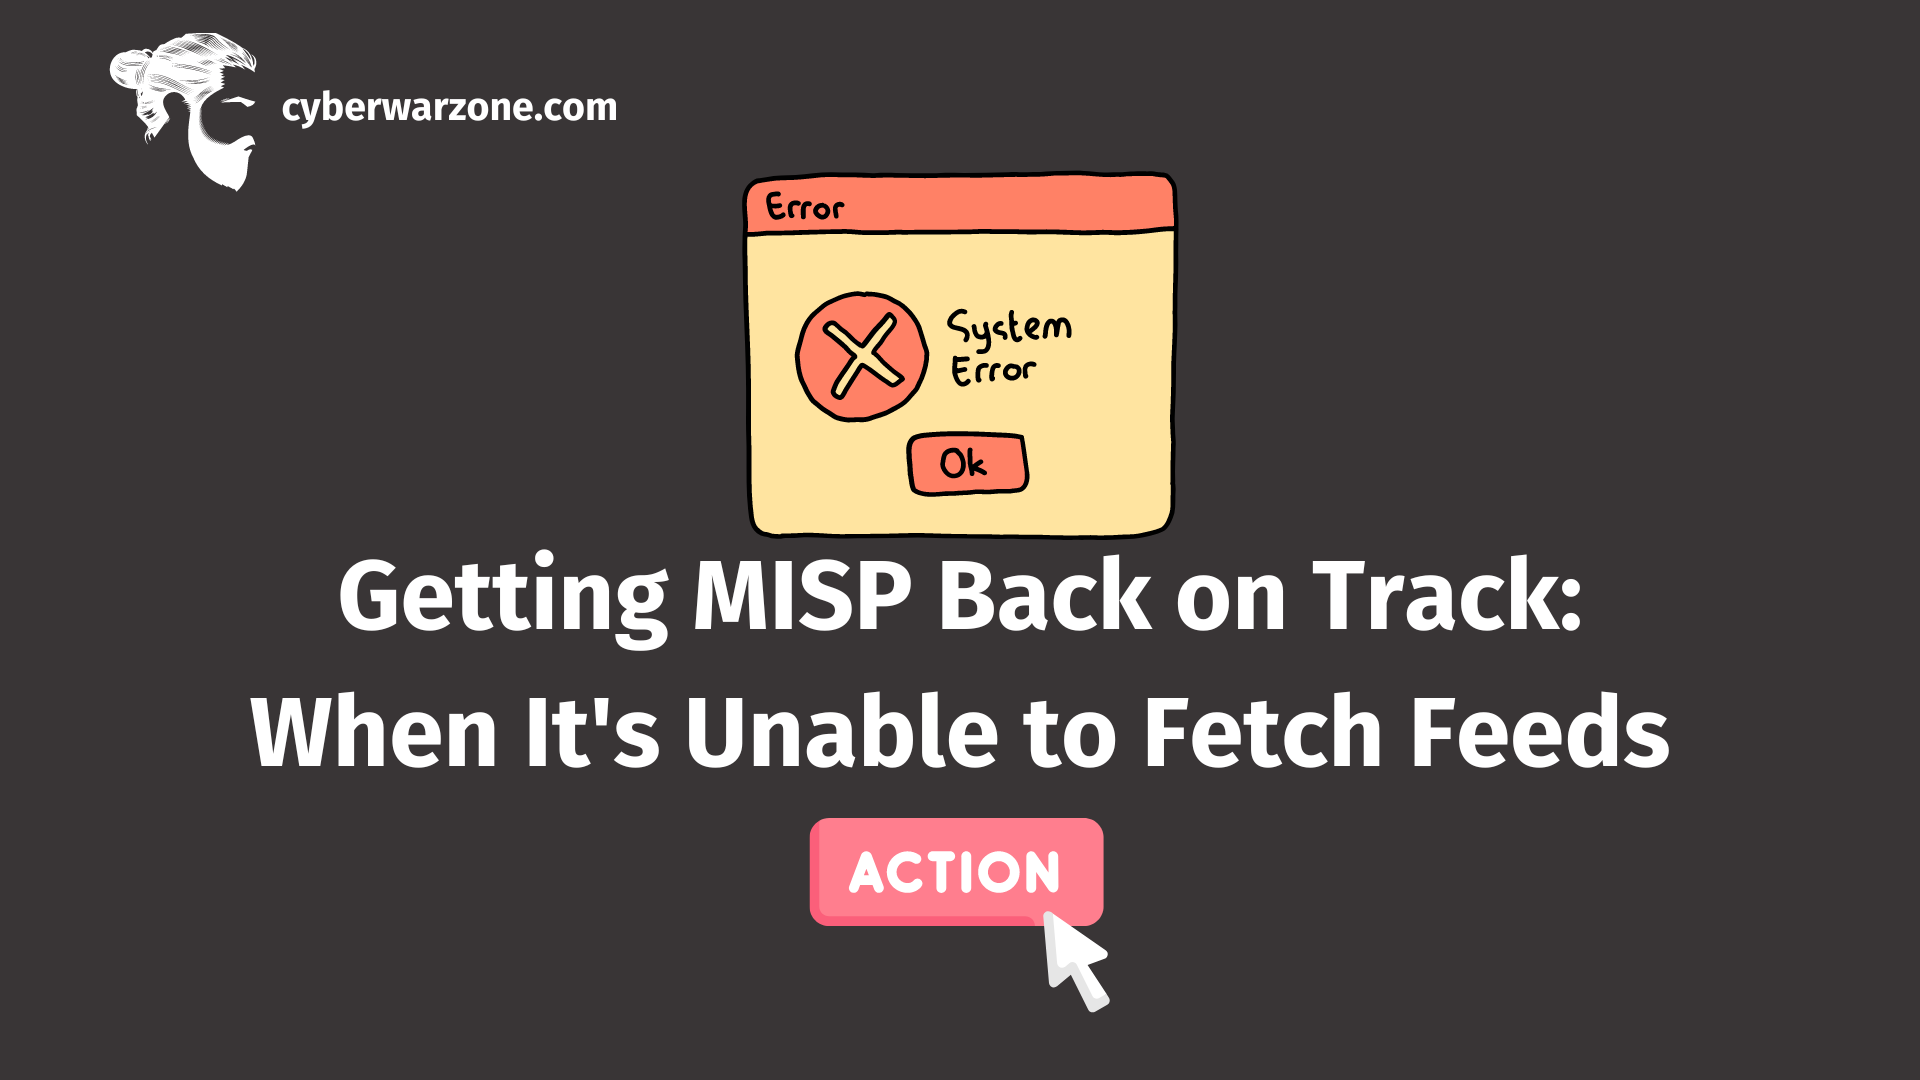 Getting MISP Back on Track: When It's Unable to Fetch Feeds